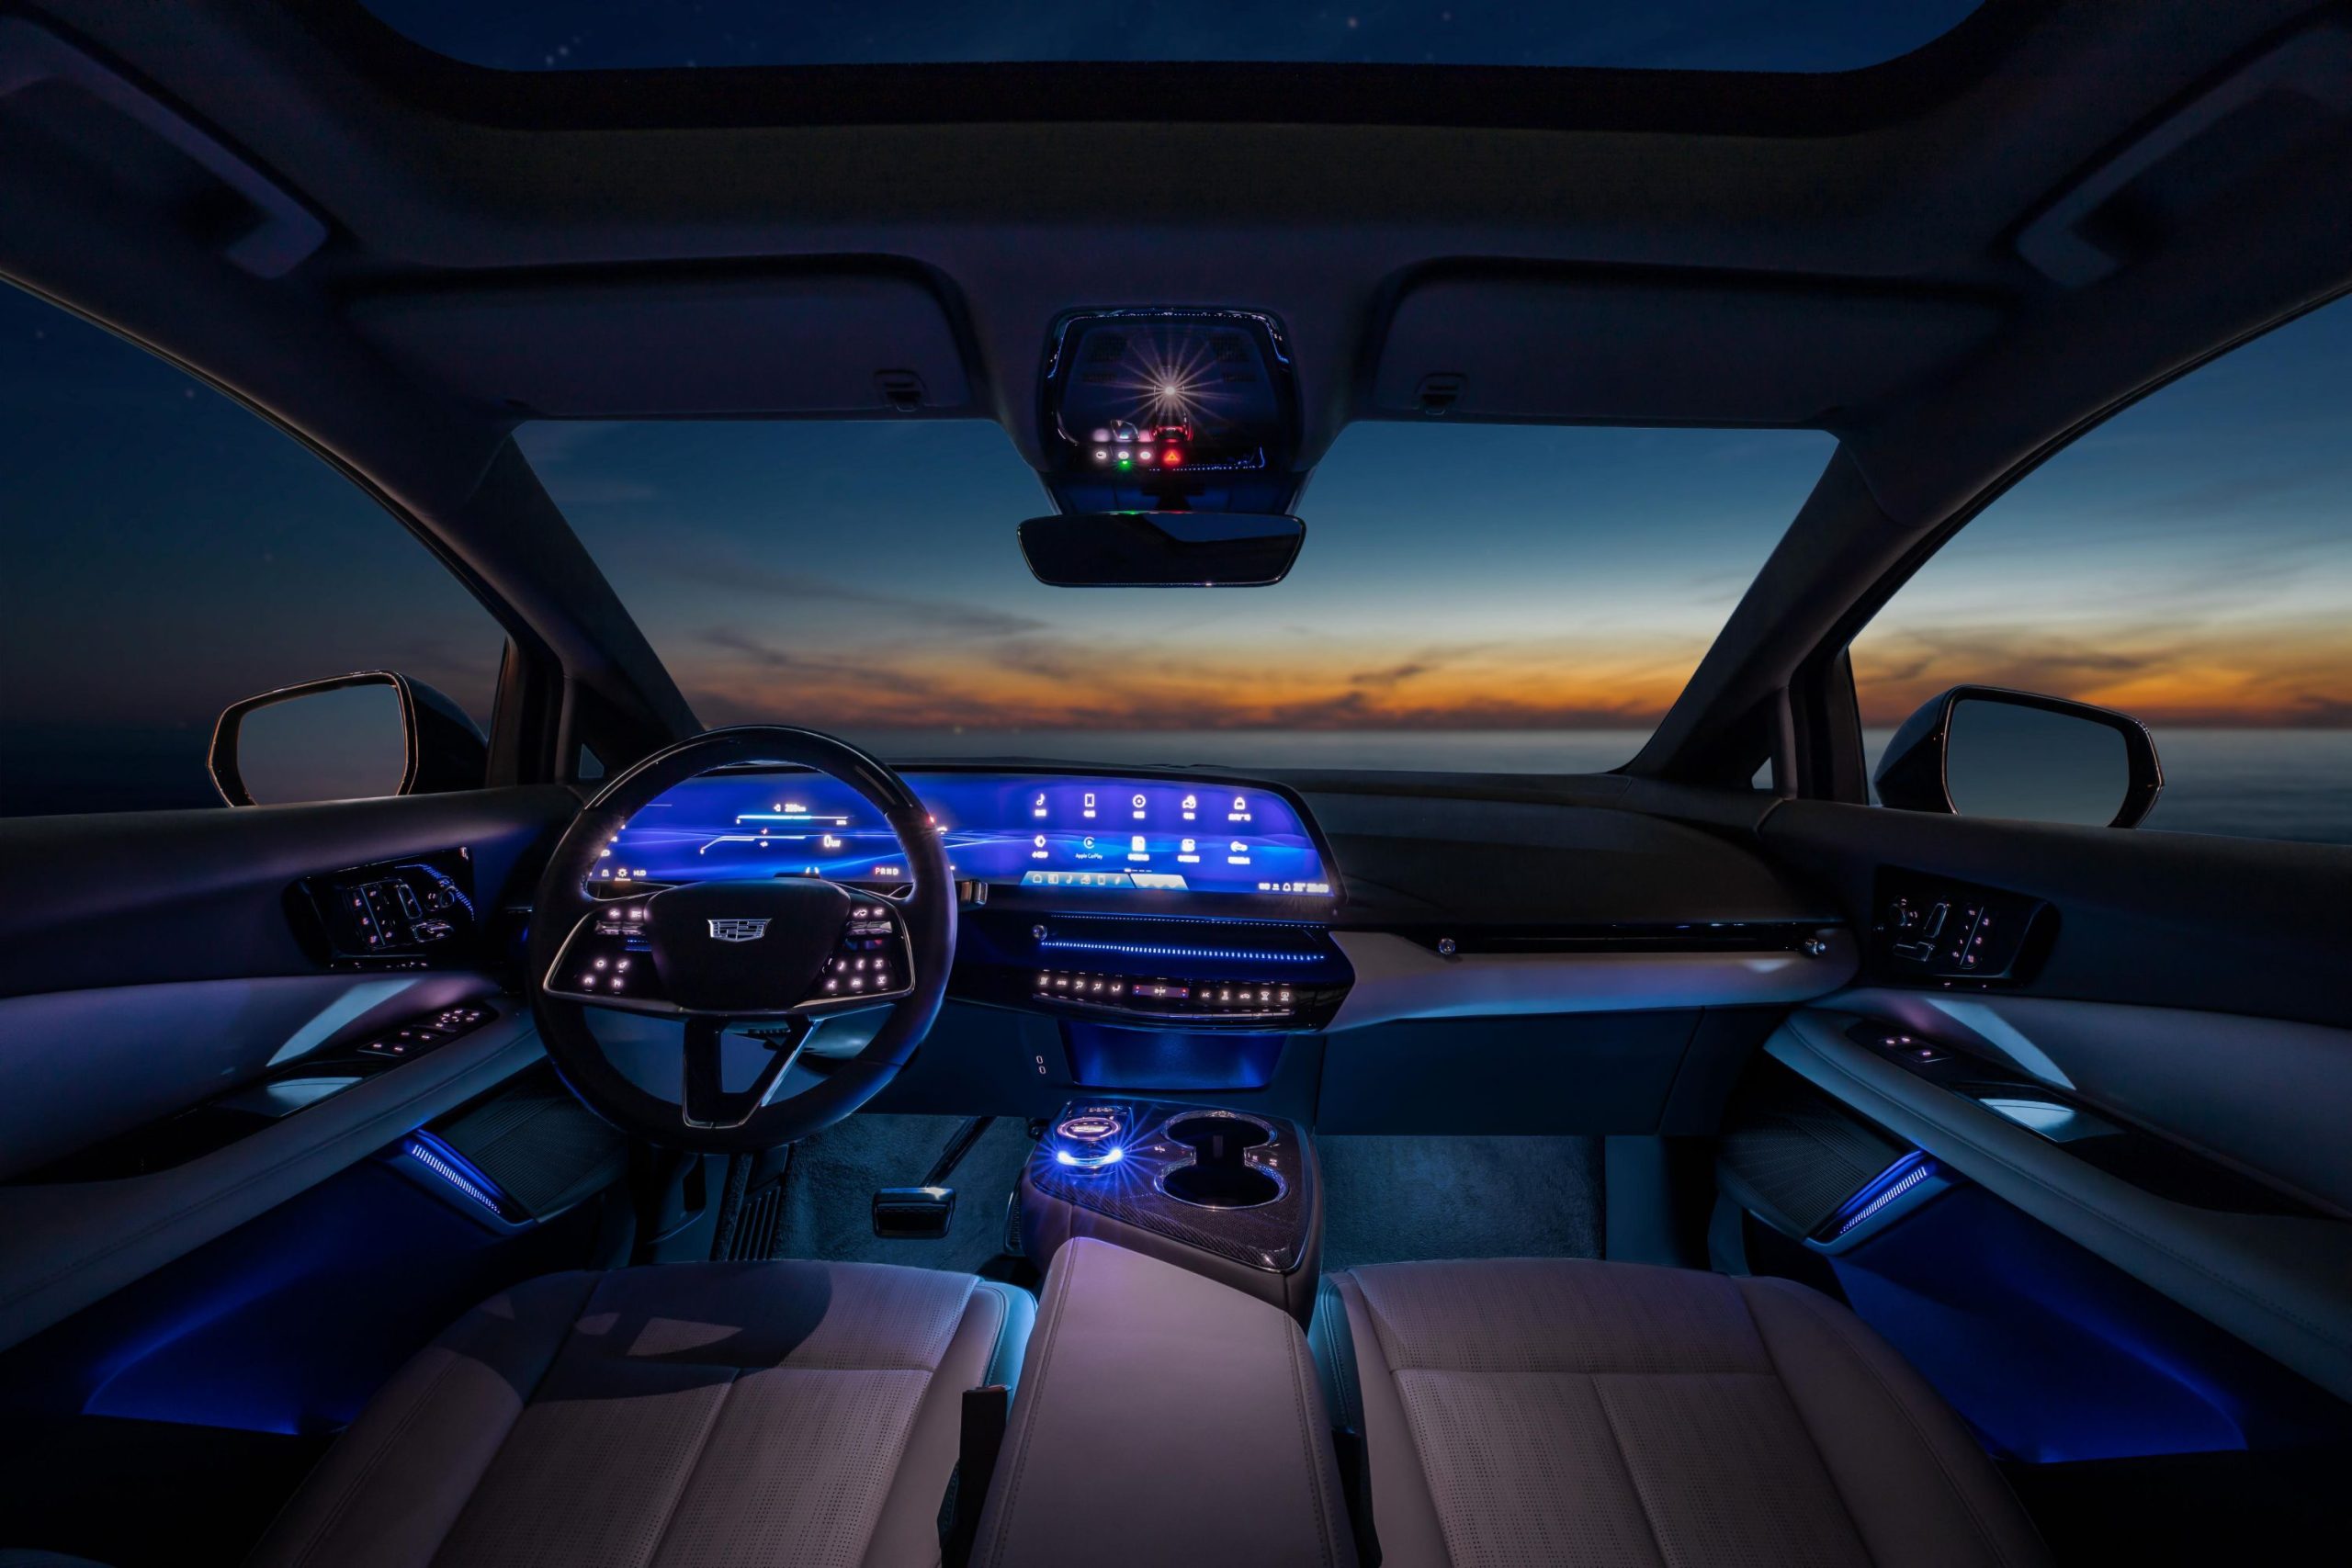 Exclusive Look: Cadillac Optiq Interior Revealed Ahead of Auto Show Debut